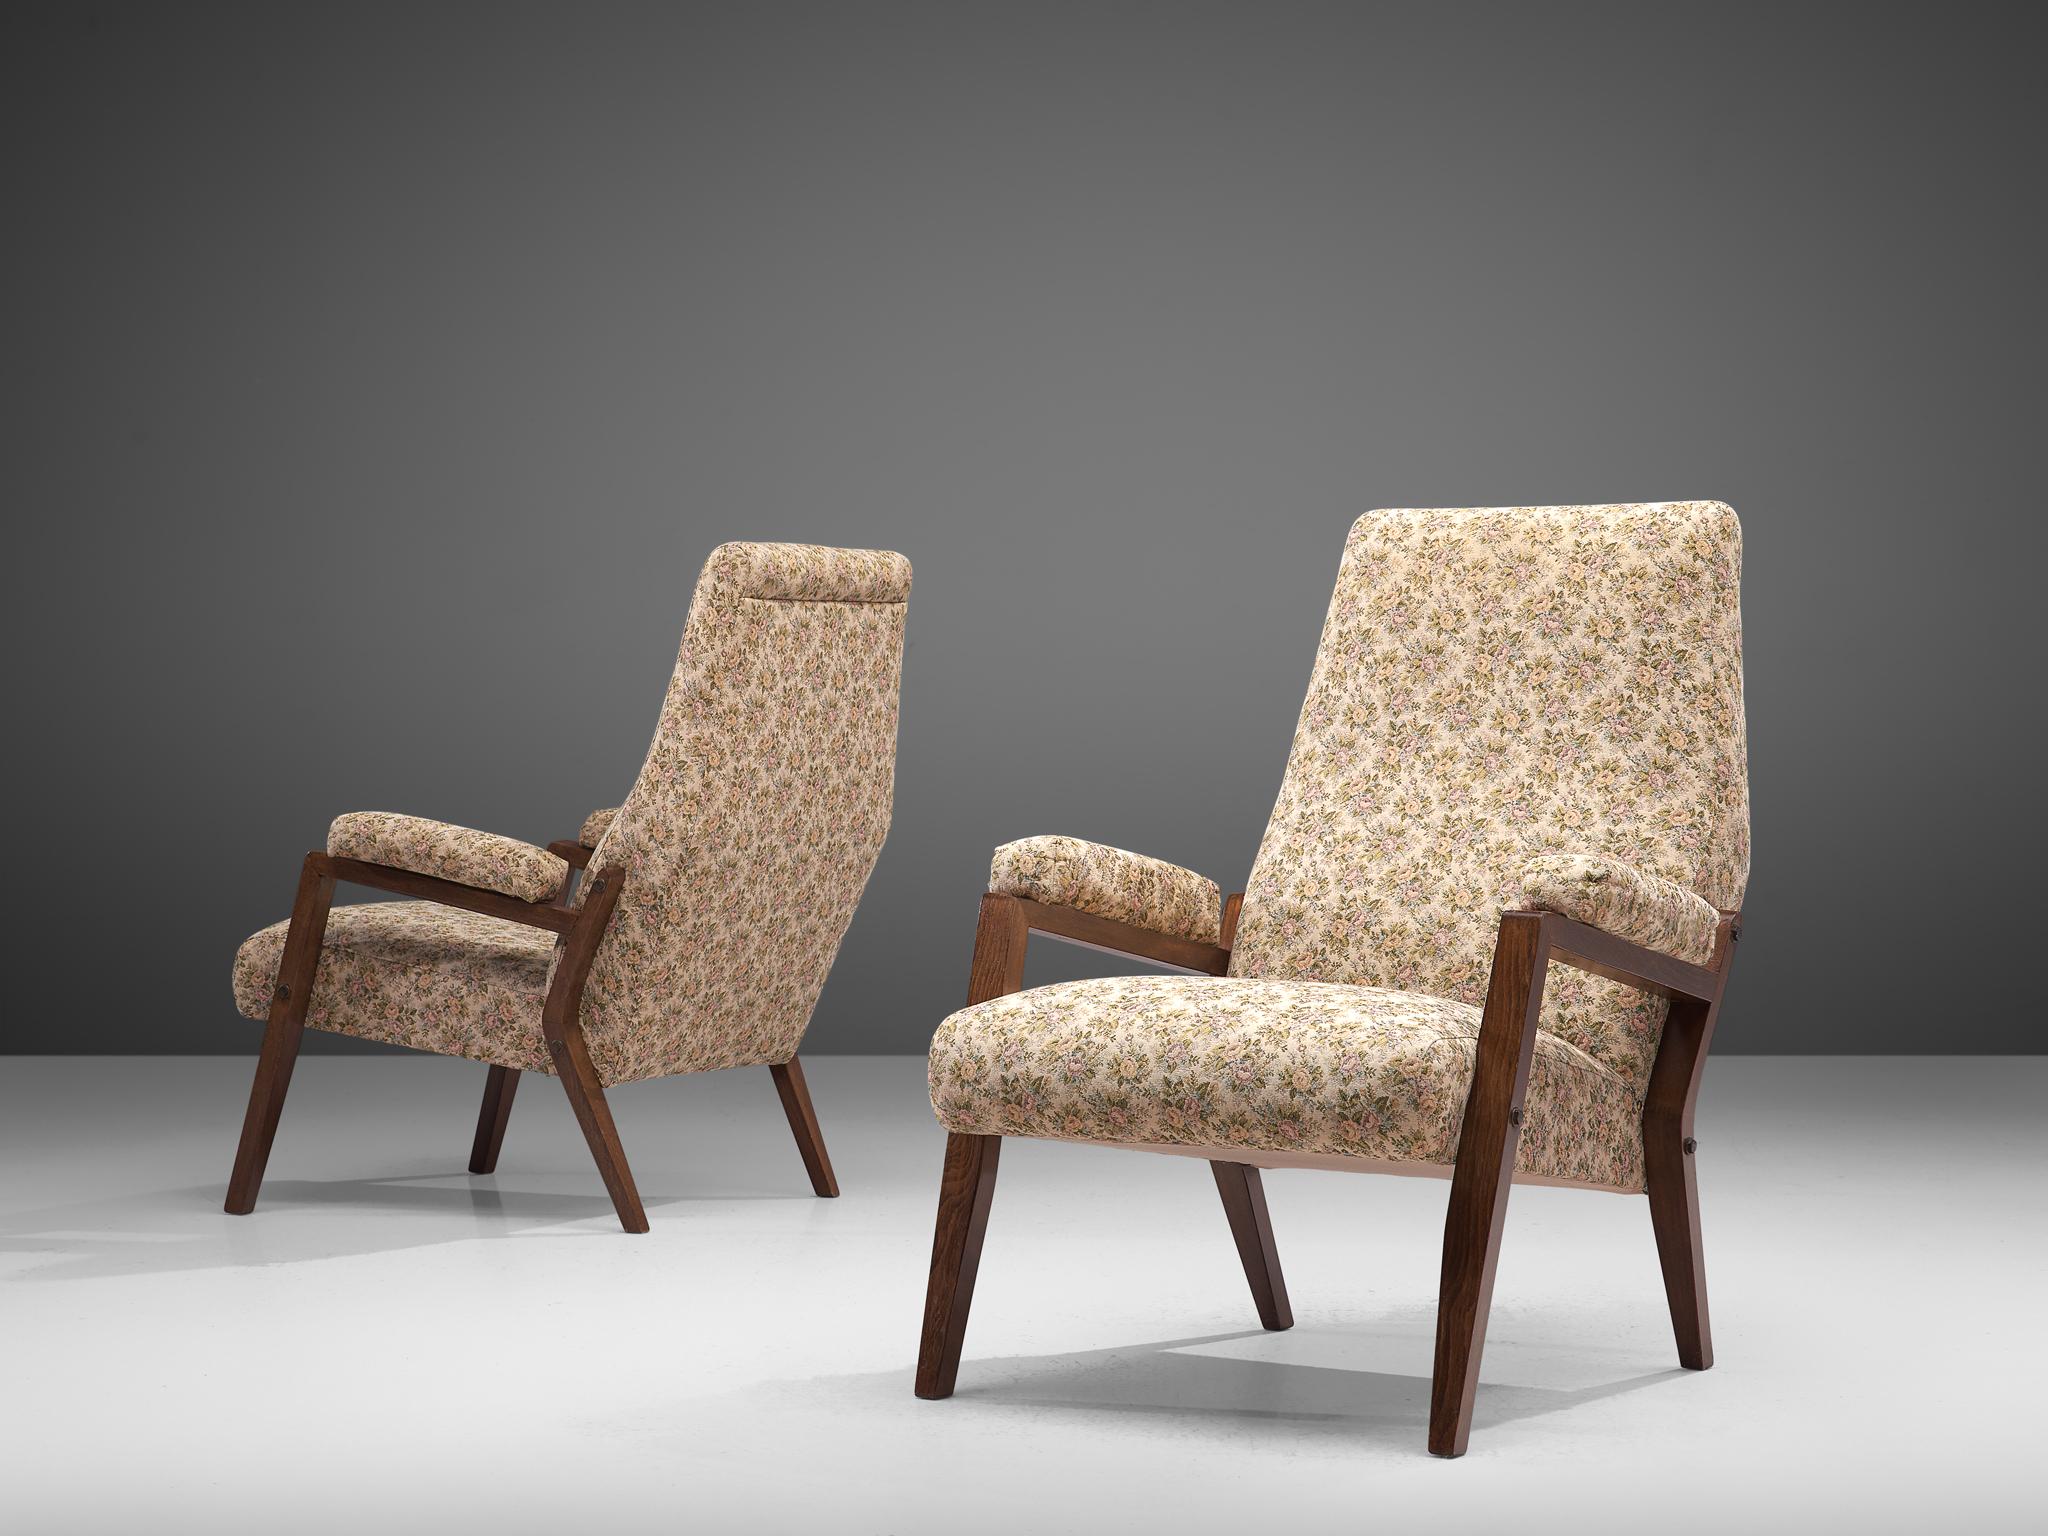 Italian lounge chairs, floral fabric, stained beech, Italy, circa 1950.

This set of two elegant armchairs in wood and light colored, floral fabric upholstery. The high tapered wooden legs provide an open look to the L-shaped seating. Beautiful